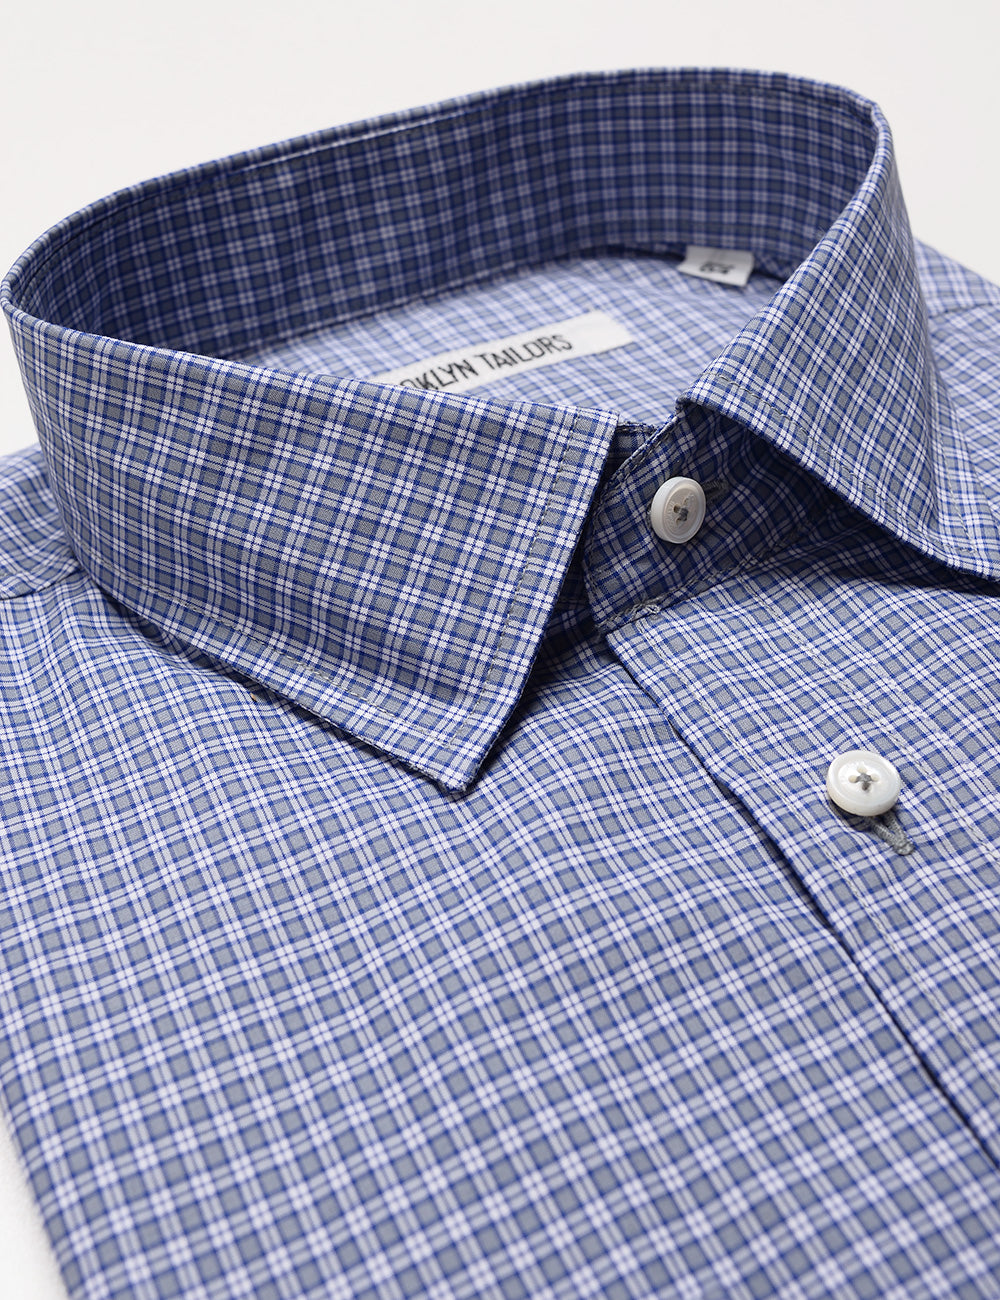 Detail of collar, buttons, and fabric pattern of Brooklyn Tailors BKT20 Slim Dress Shirt in Mini Plaid - Blue and Gray